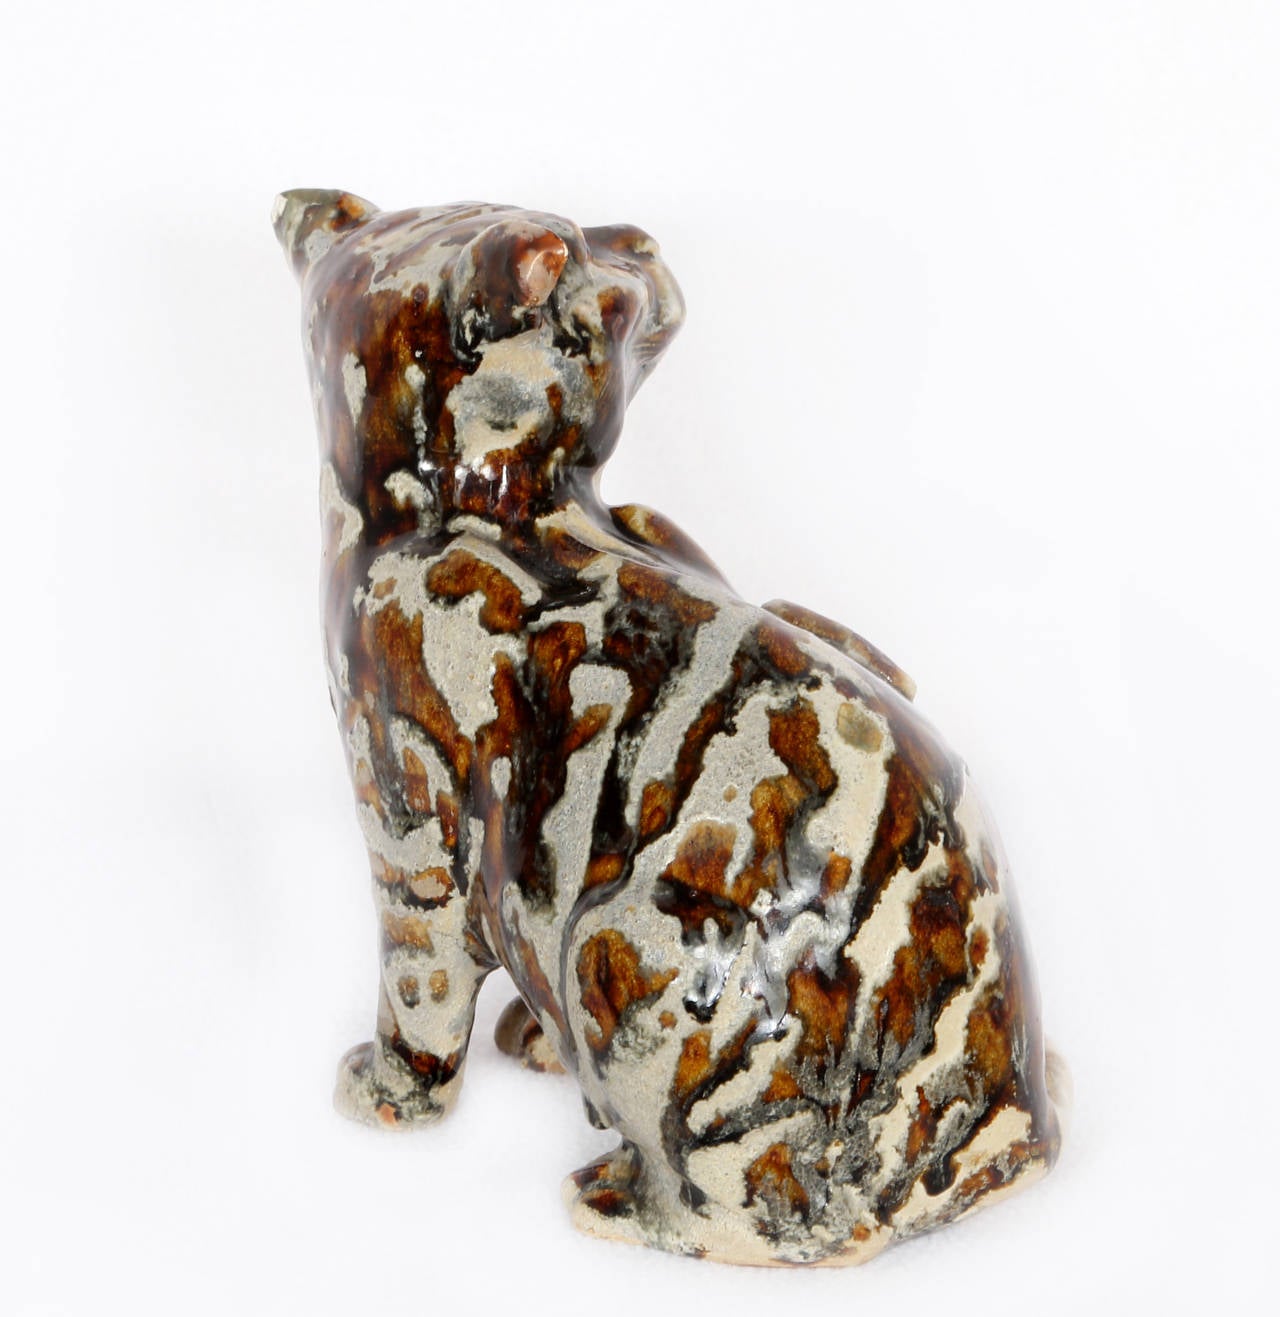 A ceramic cat figure with marbling color possibly Chinese 19th/20th Century.

Title: Seated Cat
Medium: Splash-Glazed Ceramic Figurine
Size: 5  x 9  x 5 in. (12.7  x 22.86  x 12.7 cm)